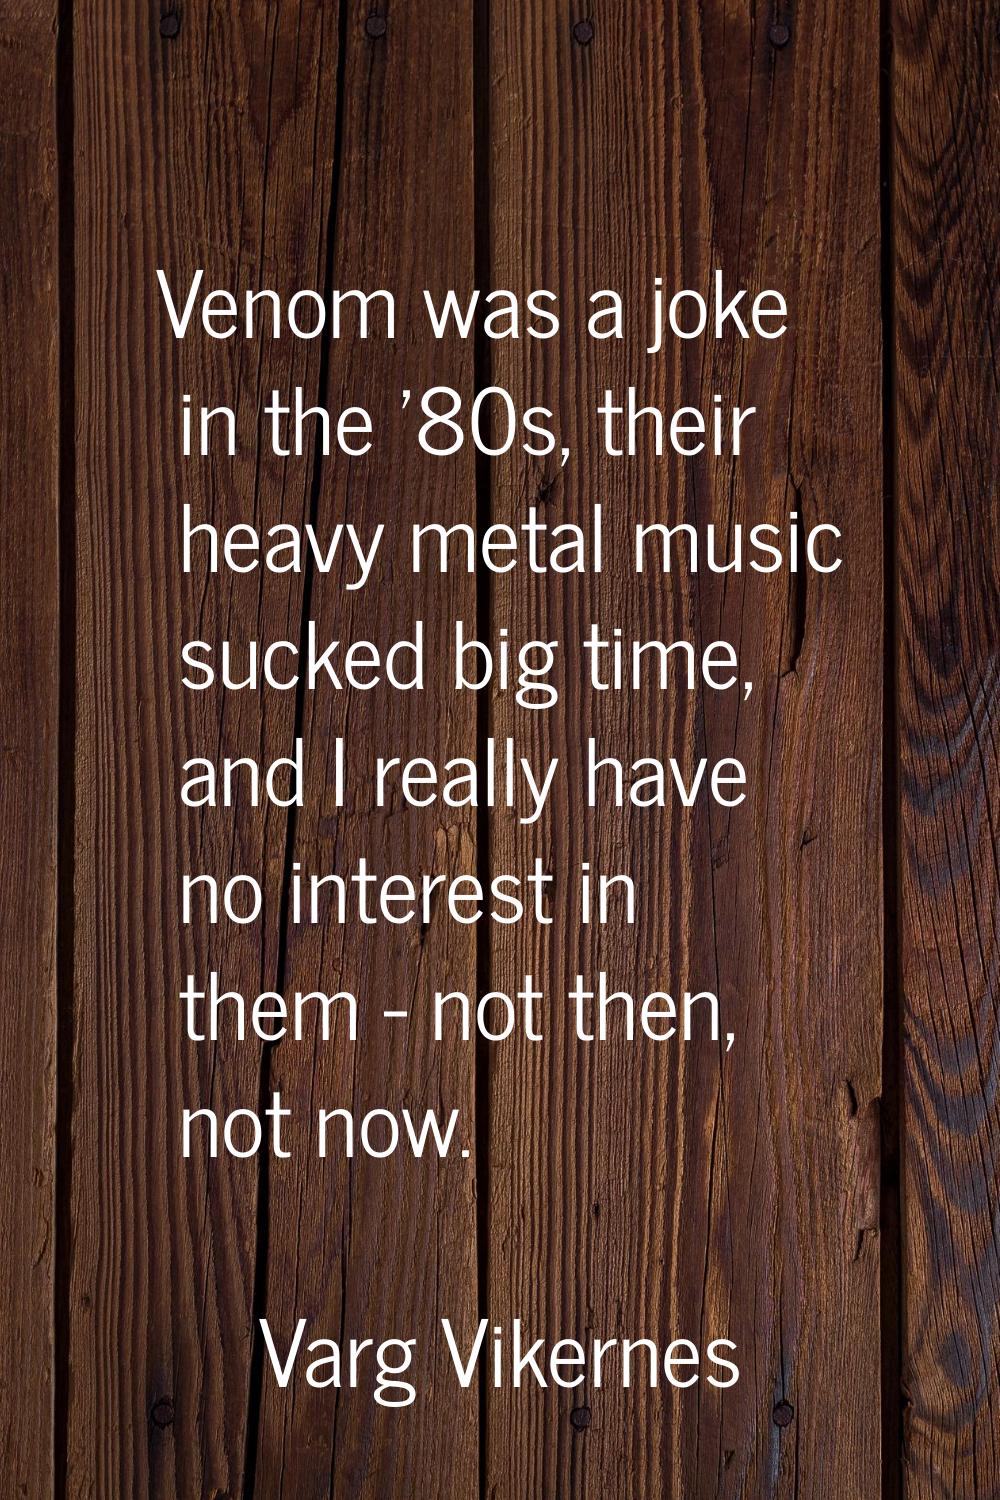 Venom was a joke in the '80s, their heavy metal music sucked big time, and I really have no interes